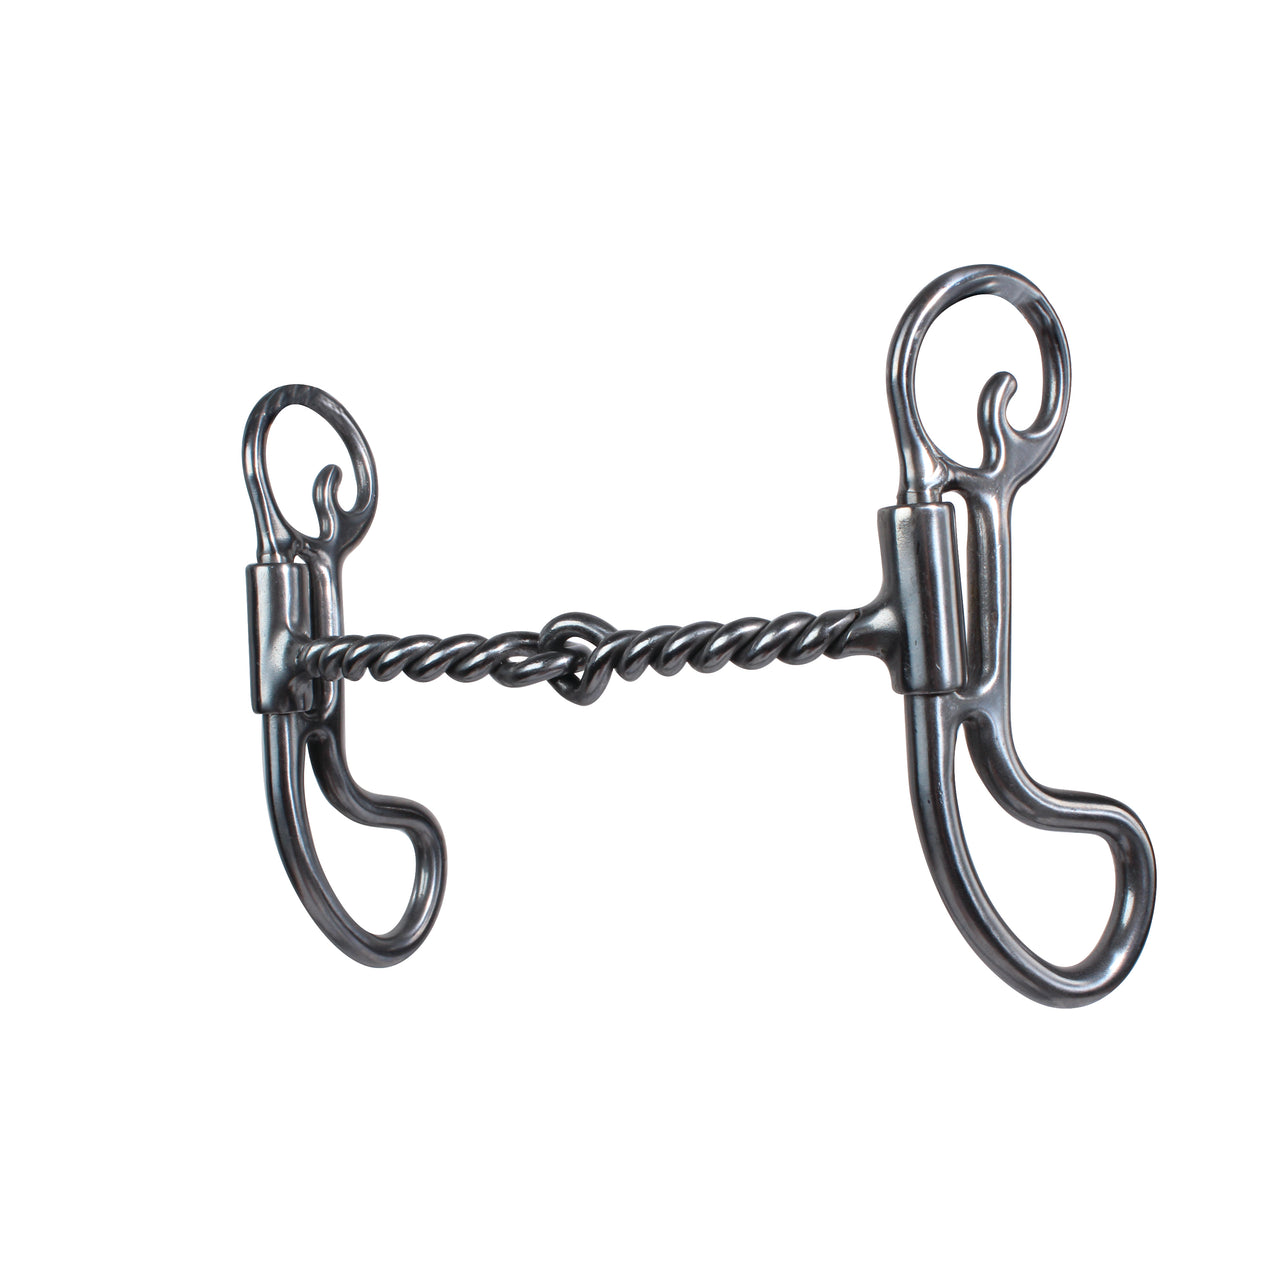 Professional's Choice Equisential Collection Teardrop Twisted Snaffle Bit